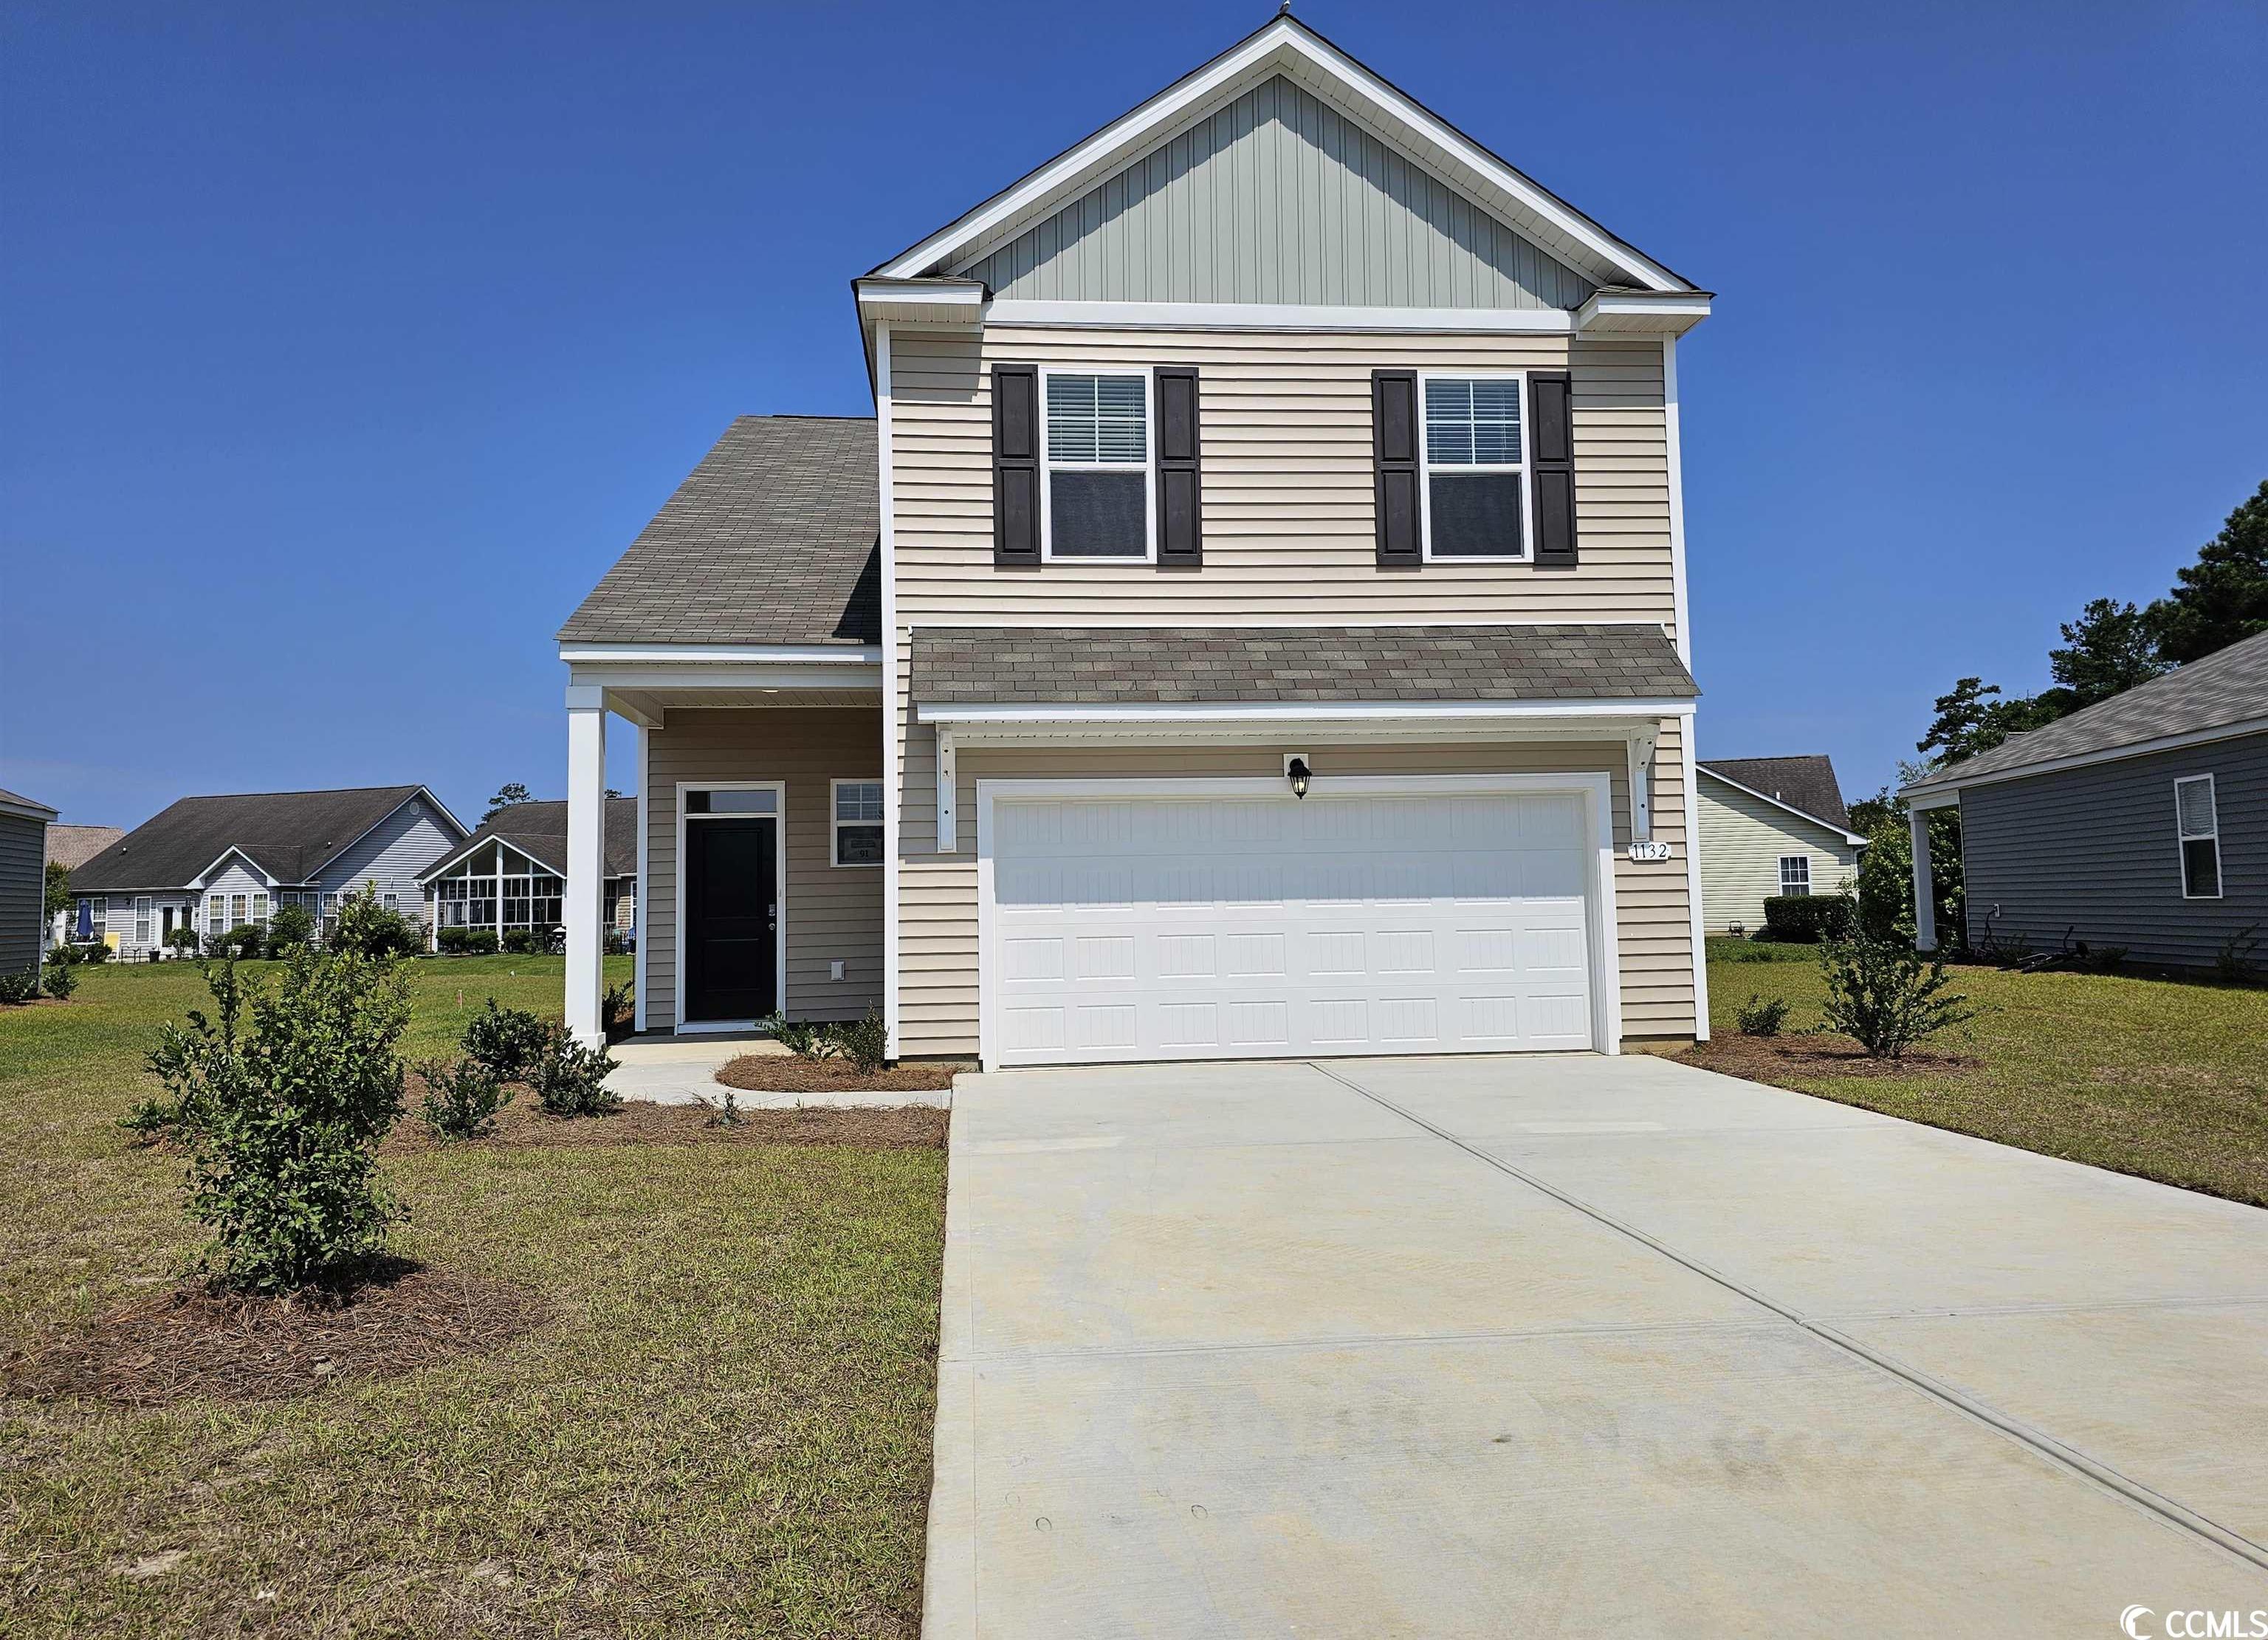 Photo one of 676 Gryffindor Dr. Longs SC 29568 | MLS 2324053